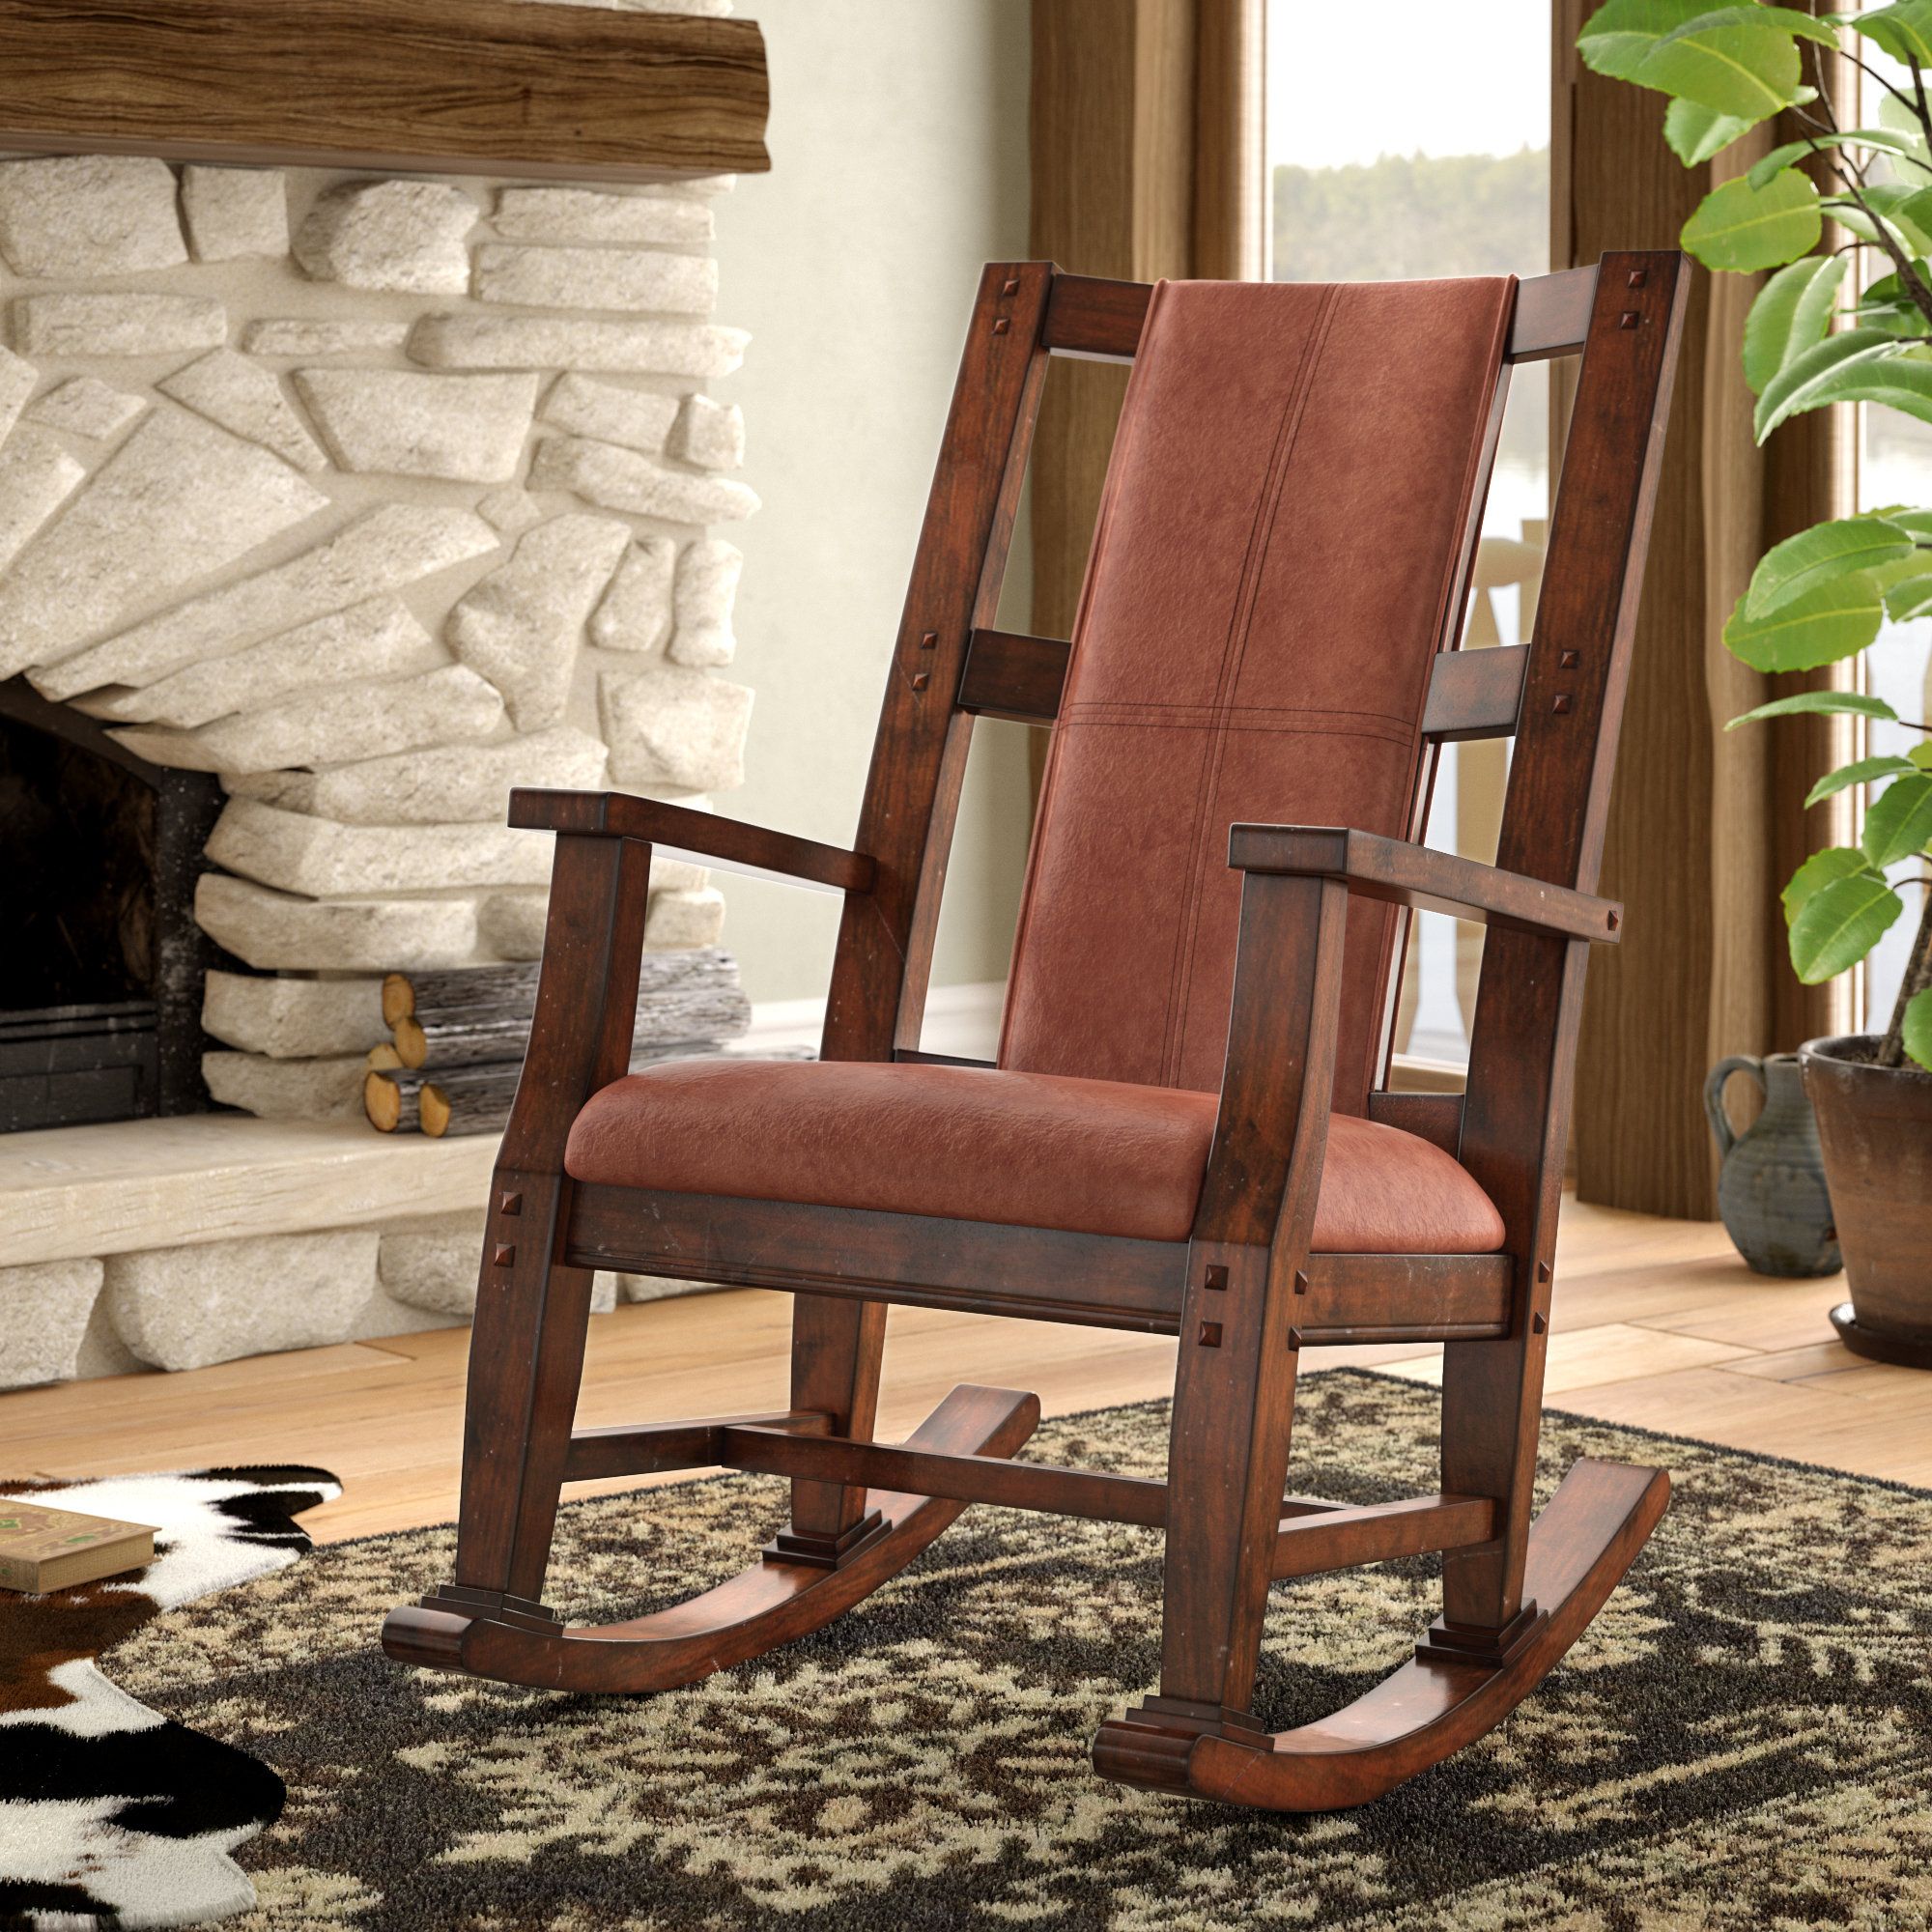 Wood Rocking Chairs You'll Love In 2019 | Wayfair Within Faux Leather Upholstered Wooden Rocking Chairs With Looped Arms, Brown And Red (View 8 of 20)